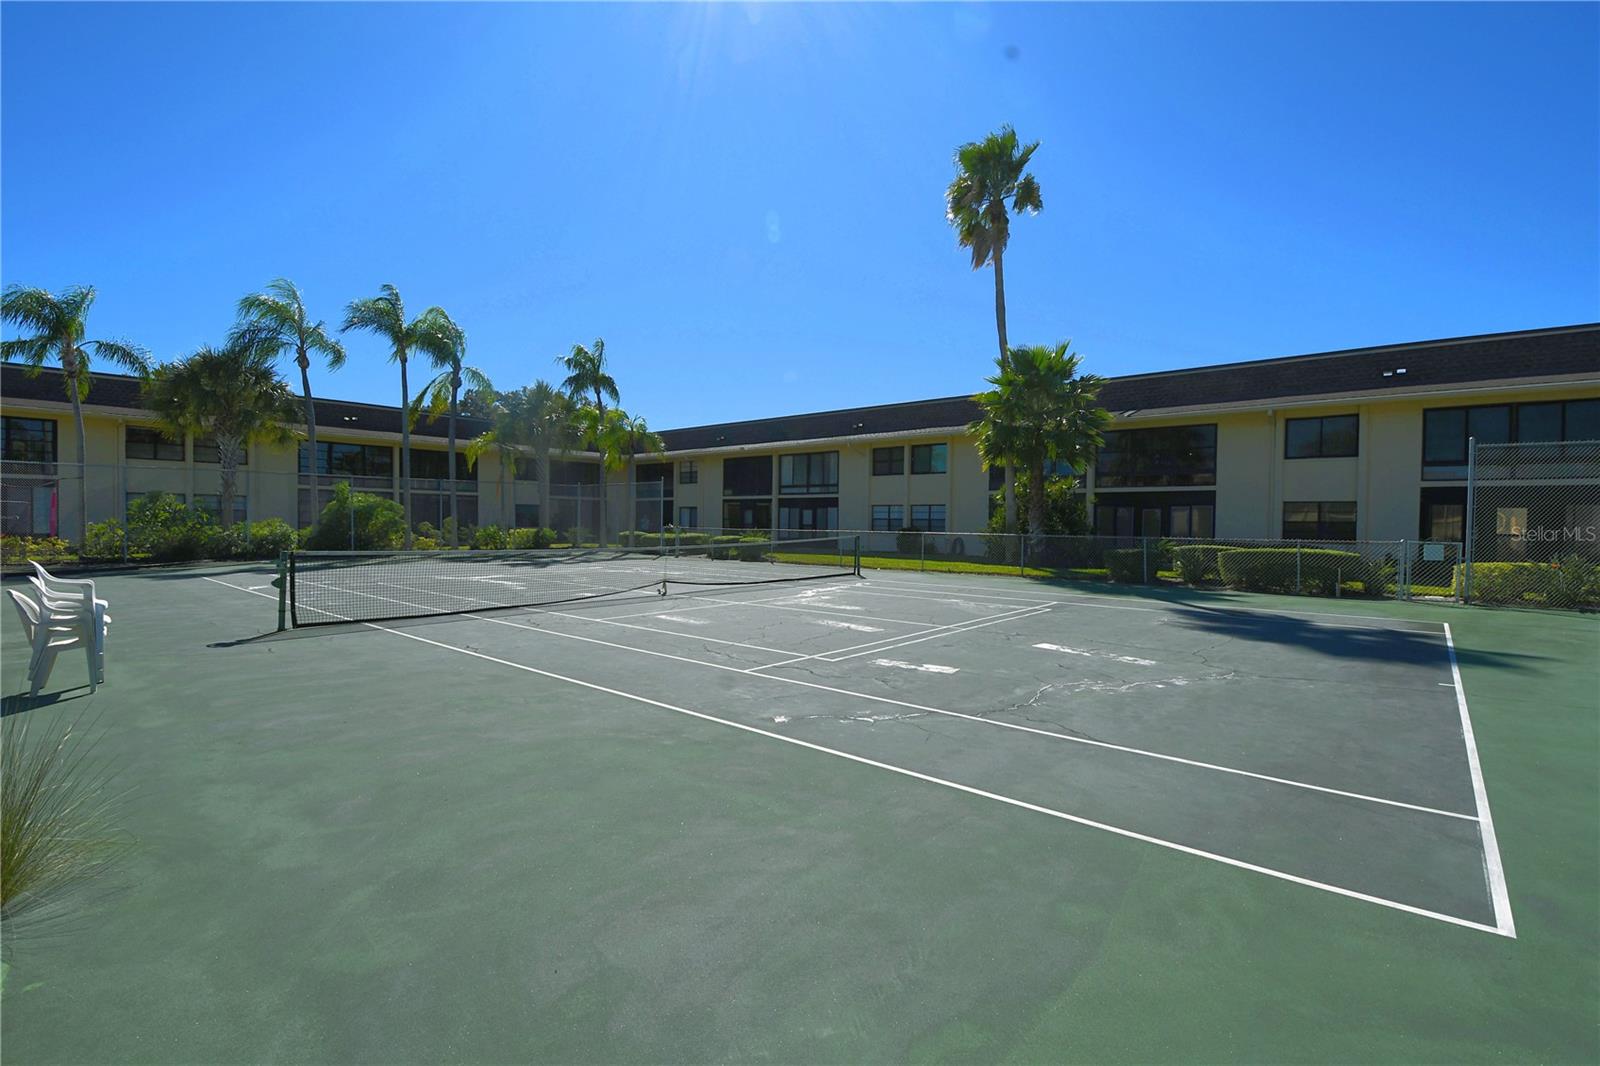 The community also features tennis and pickleball courts.